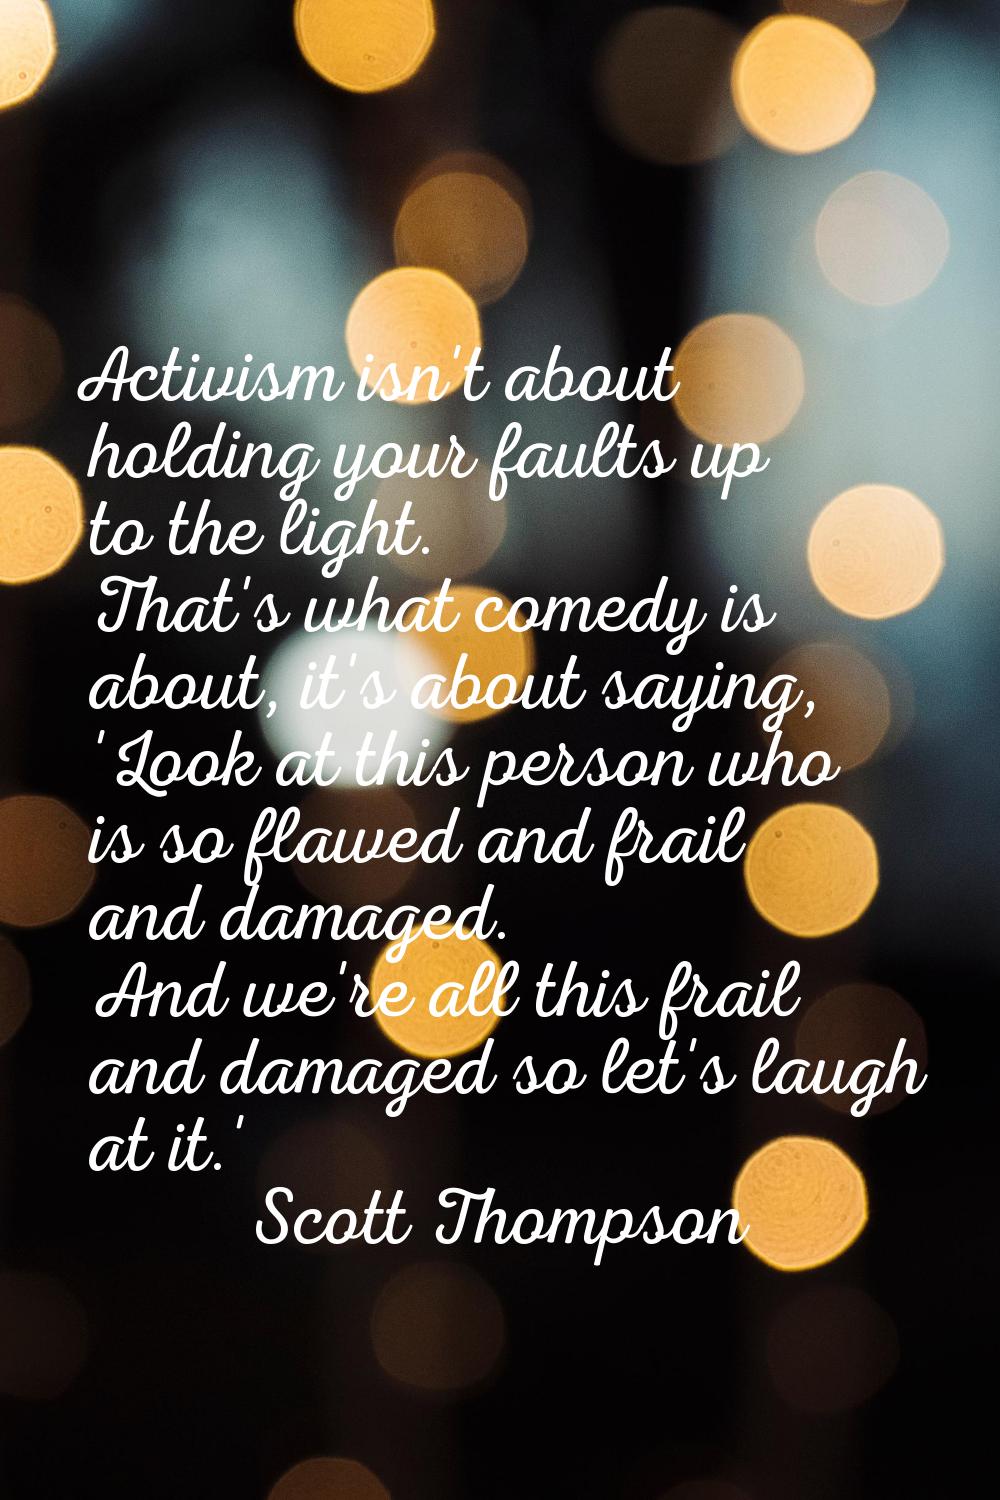 Activism isn't about holding your faults up to the light. That's what comedy is about, it's about s